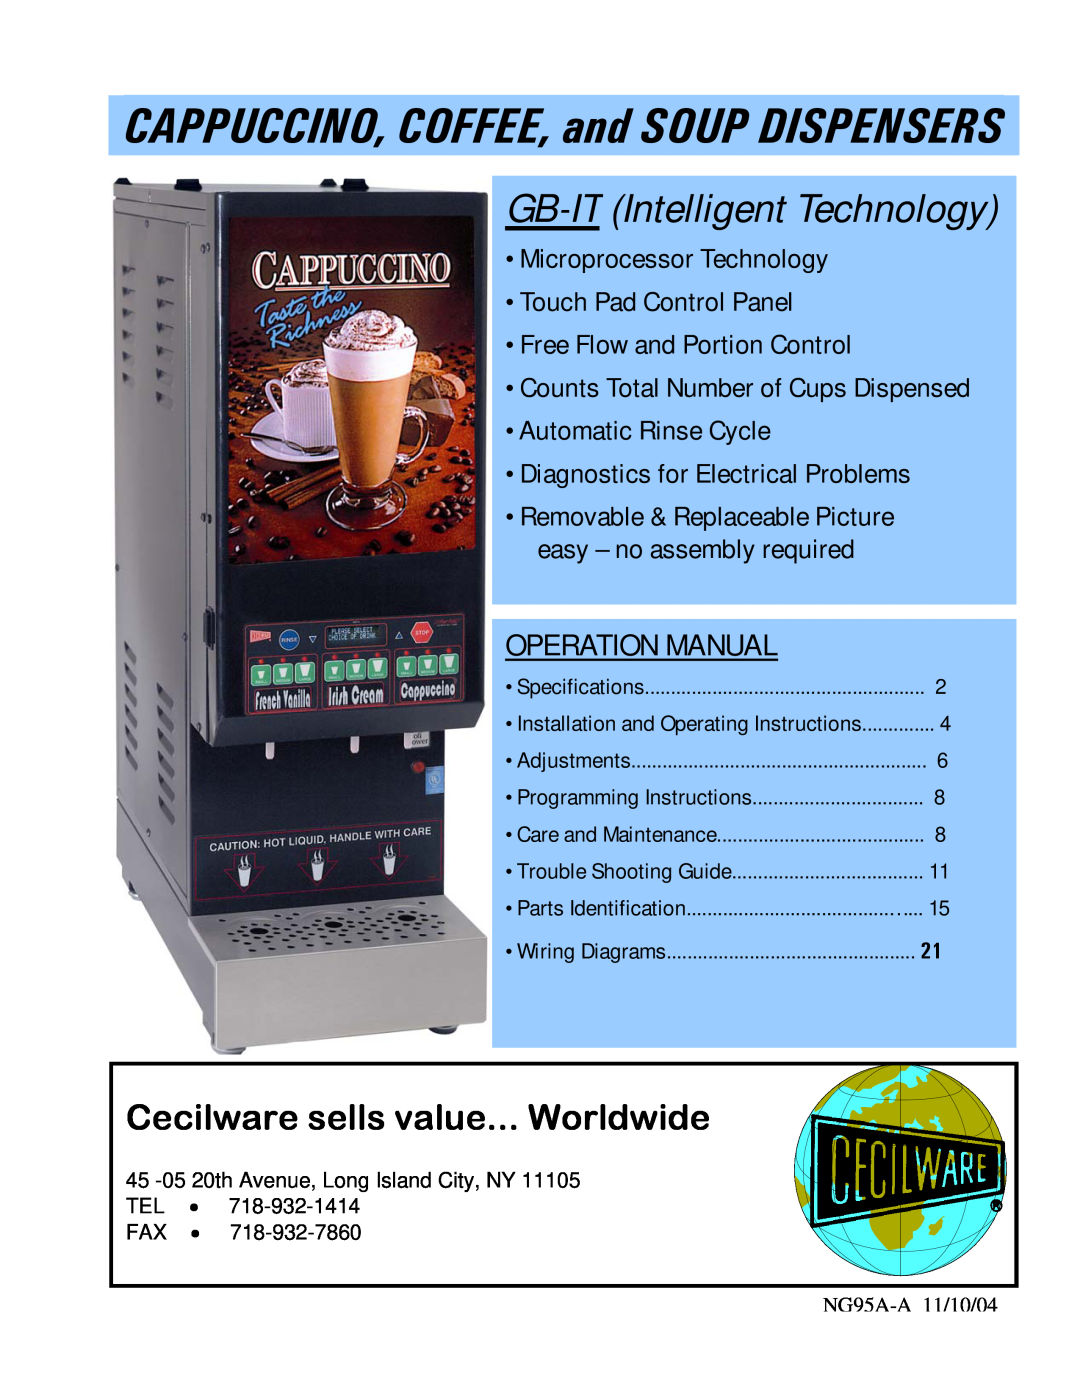 Cecilware operation manual CAPPUCCINO, COFFEE, and SOUP DISPENSERS GB-IT Intelligent Technology 